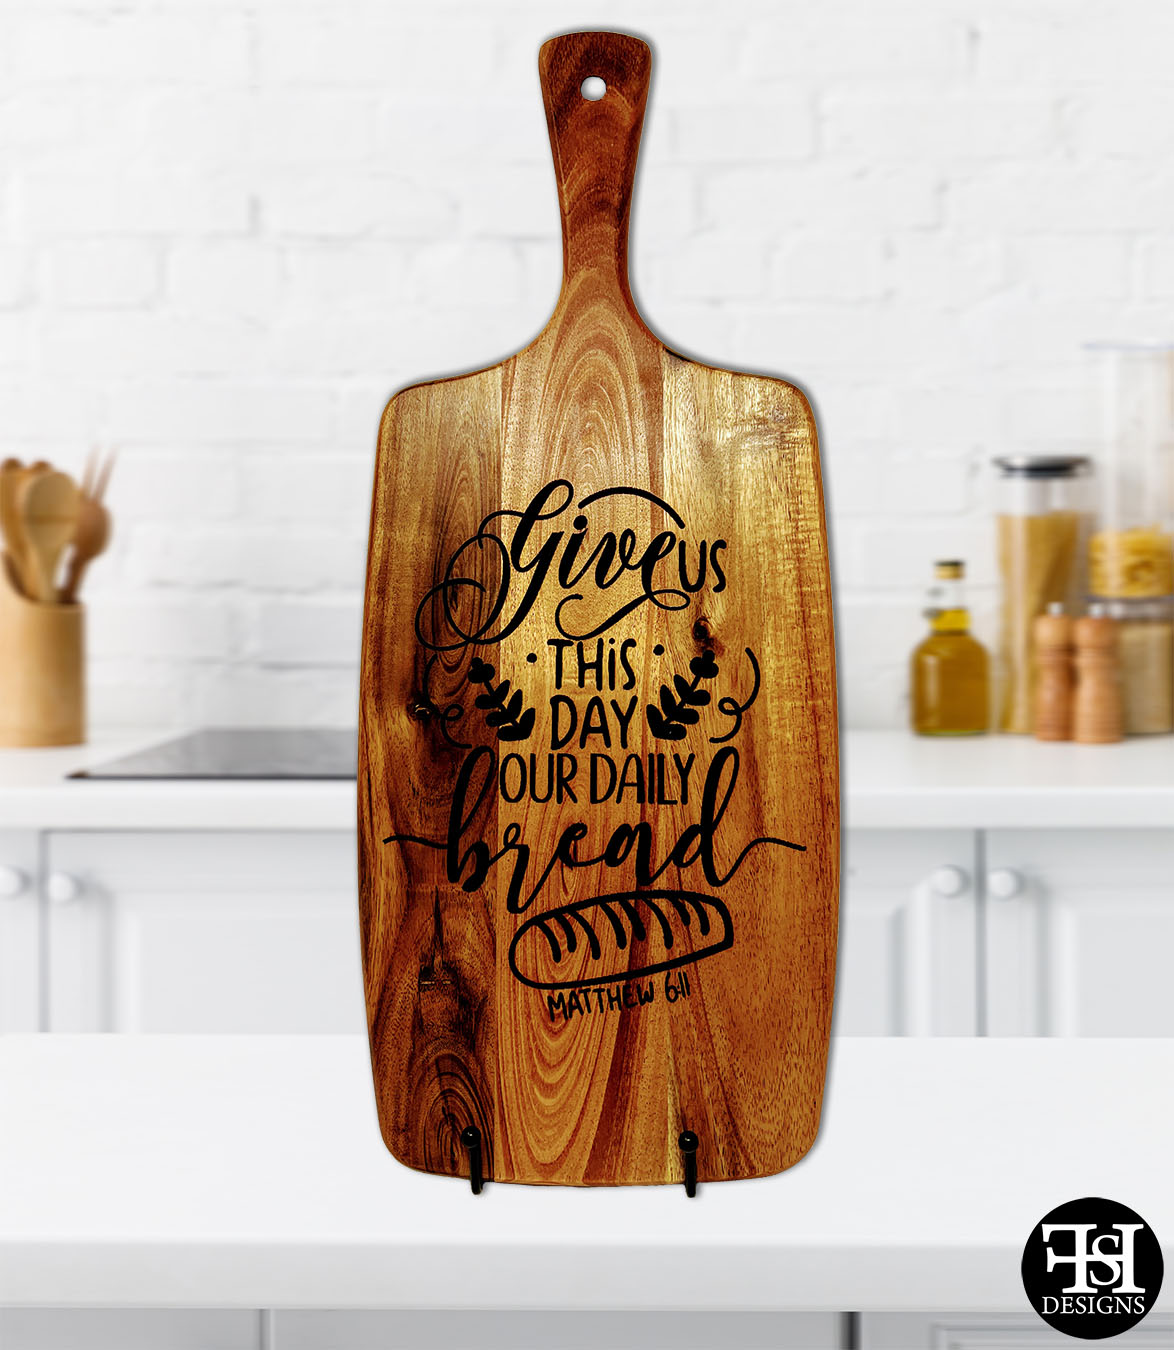 https://www.fhsdesigns.com/wp-content/uploads/cutting-board-give-us-this-day-our-daily-bread-live-bg.jpg